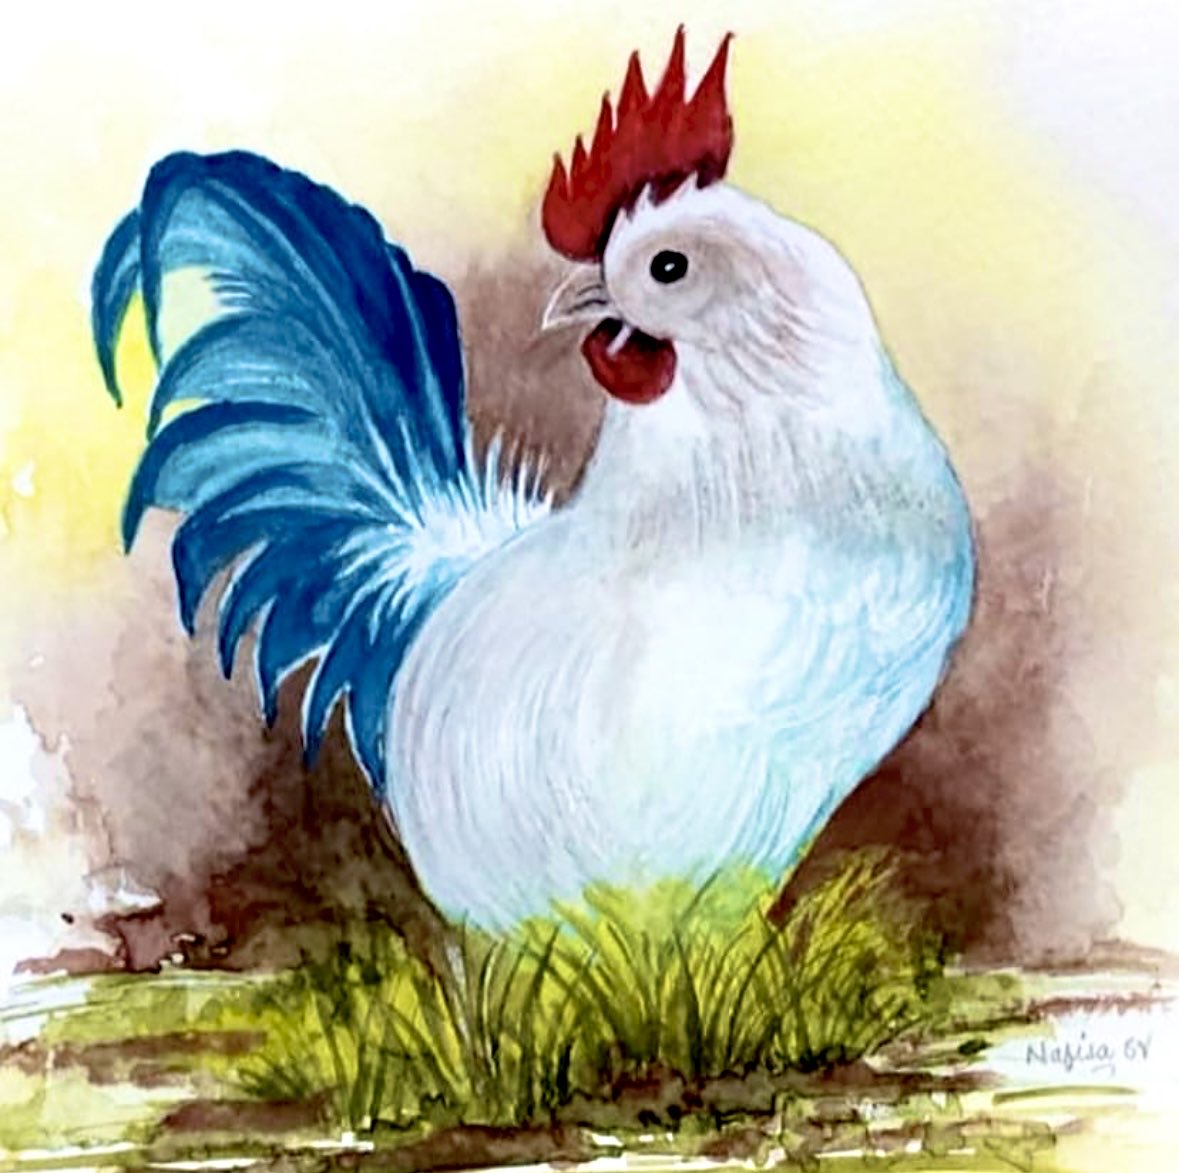 🖌️  Hi Twitter Friends,
Good Morning with the Rooster crowing. May your day be filled with joy and opportunities!!
#ArtbyMe
#PrintedinCalendarsofLIF